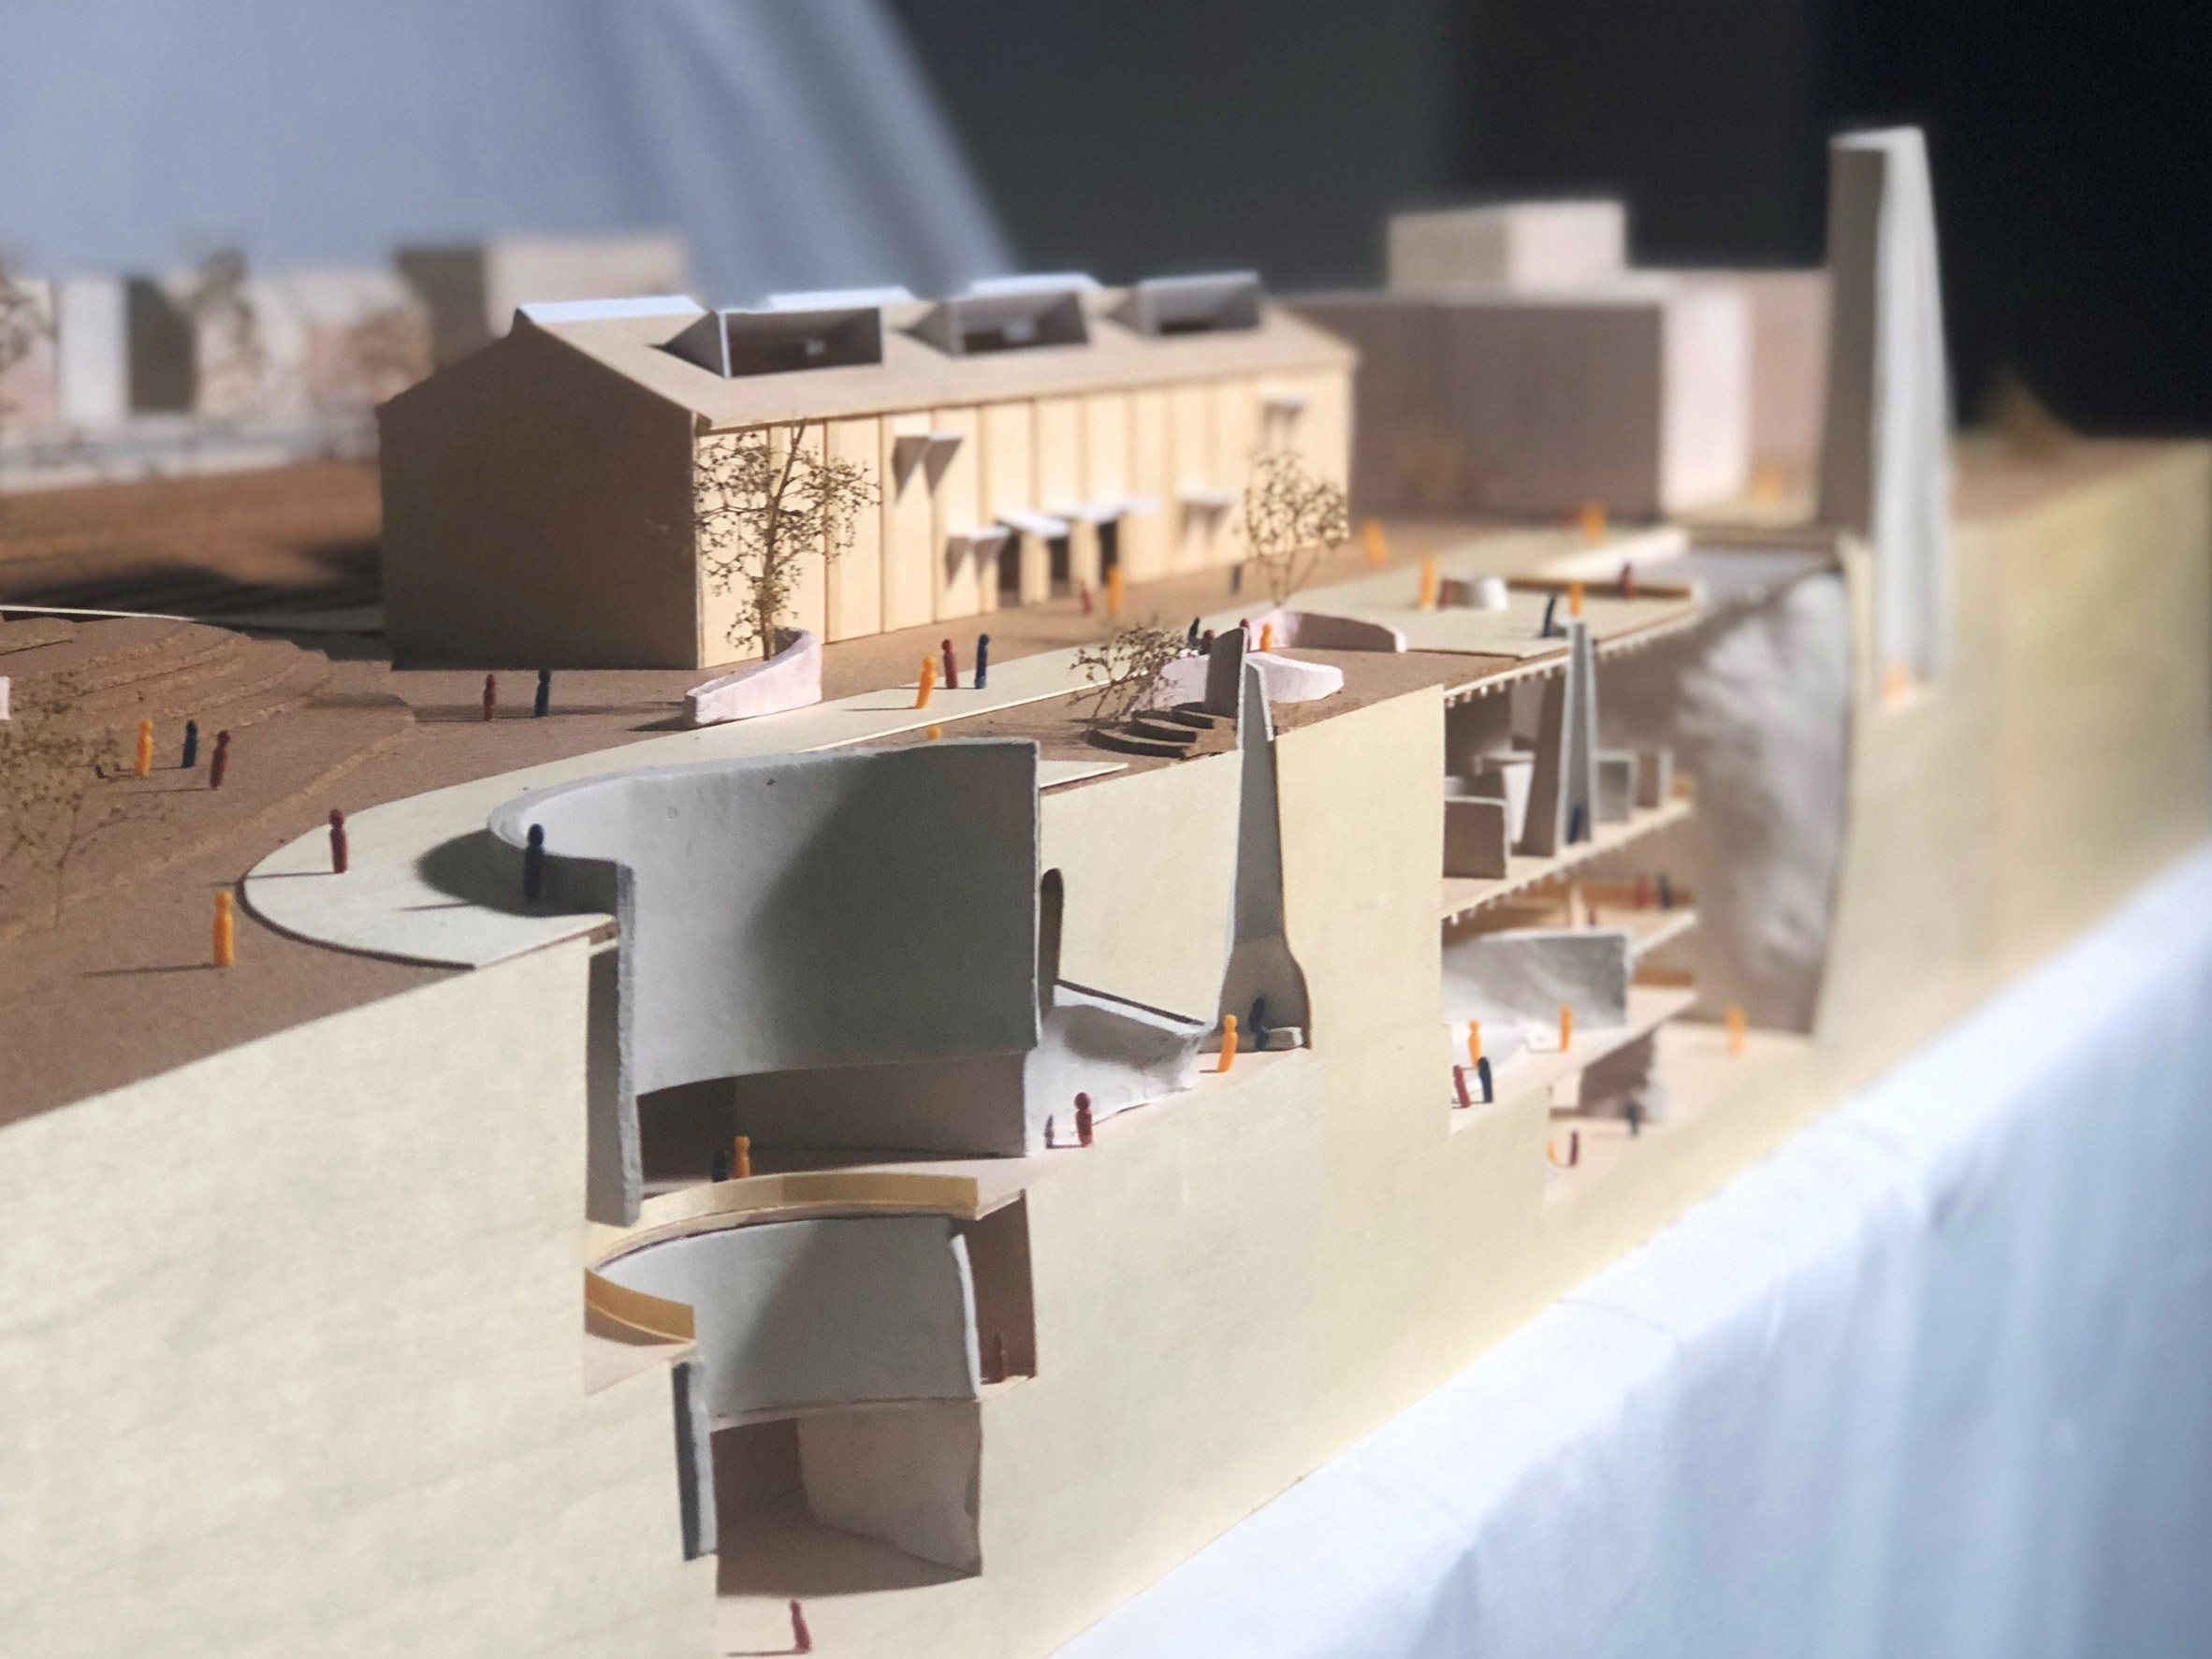 A sectional model by UNSW Sydney student Sarah MacDonald